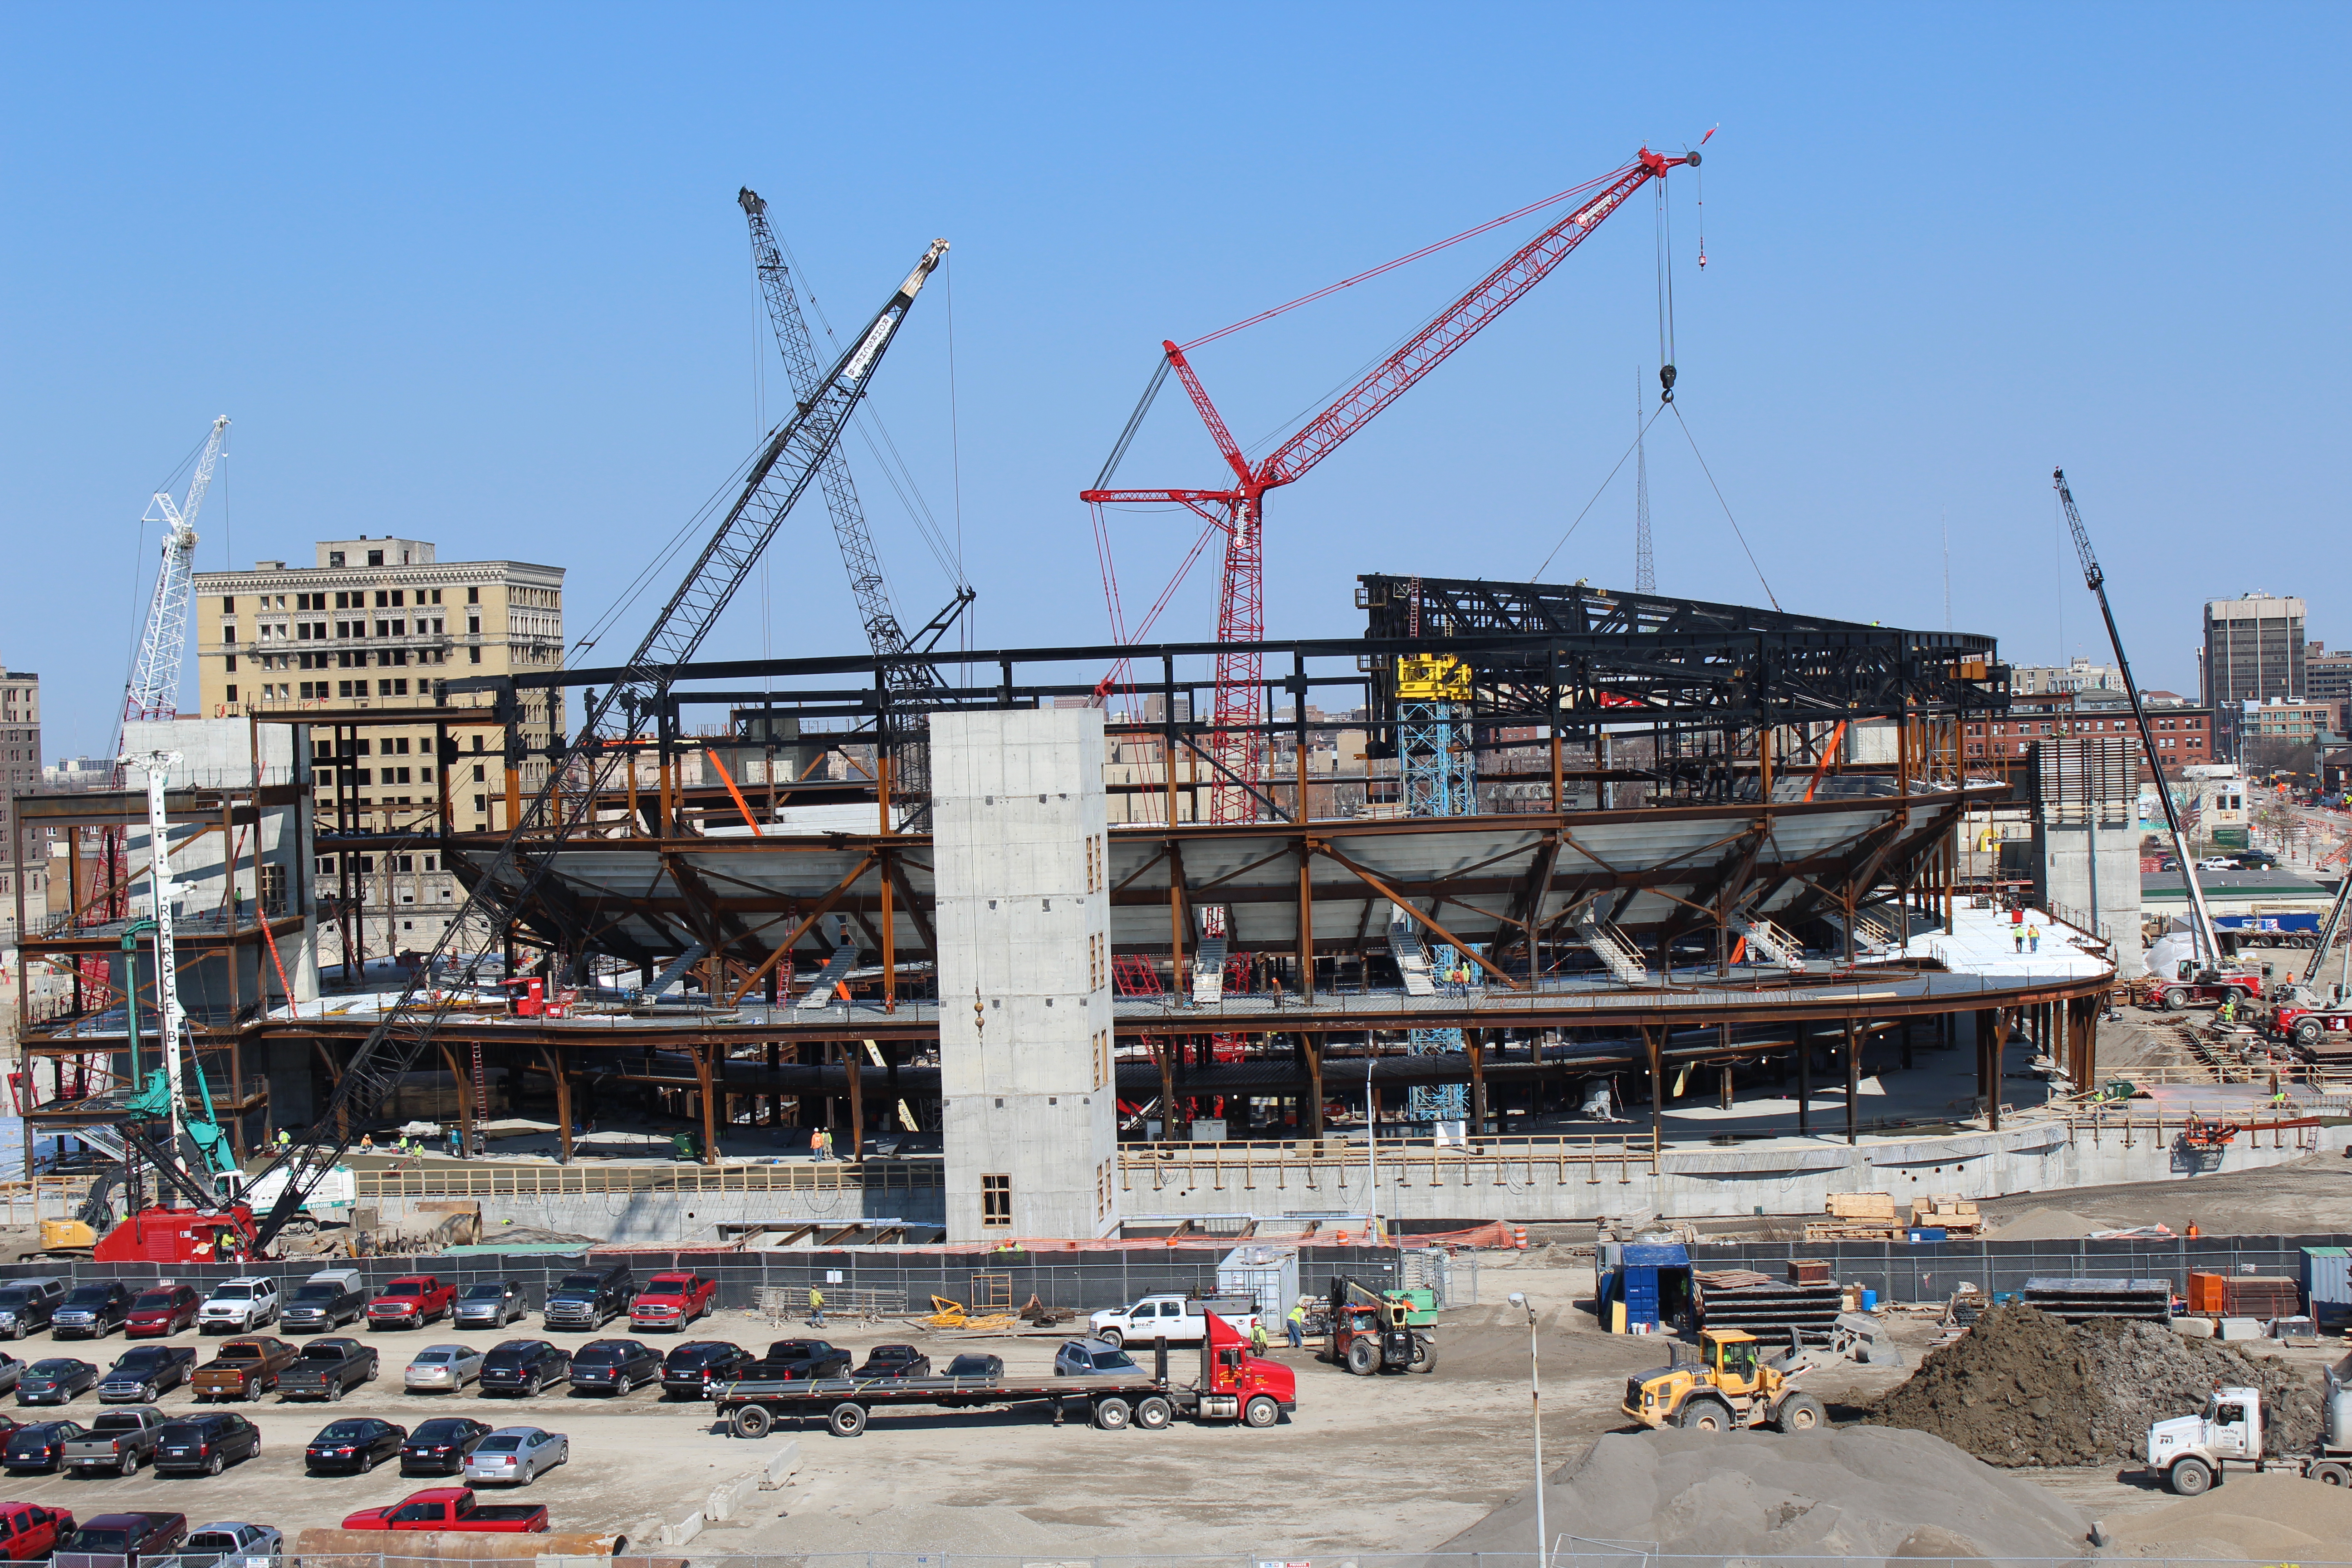 Photo of construction of Little Caesars Arena showing the metal frame of the arena is nearly complete.